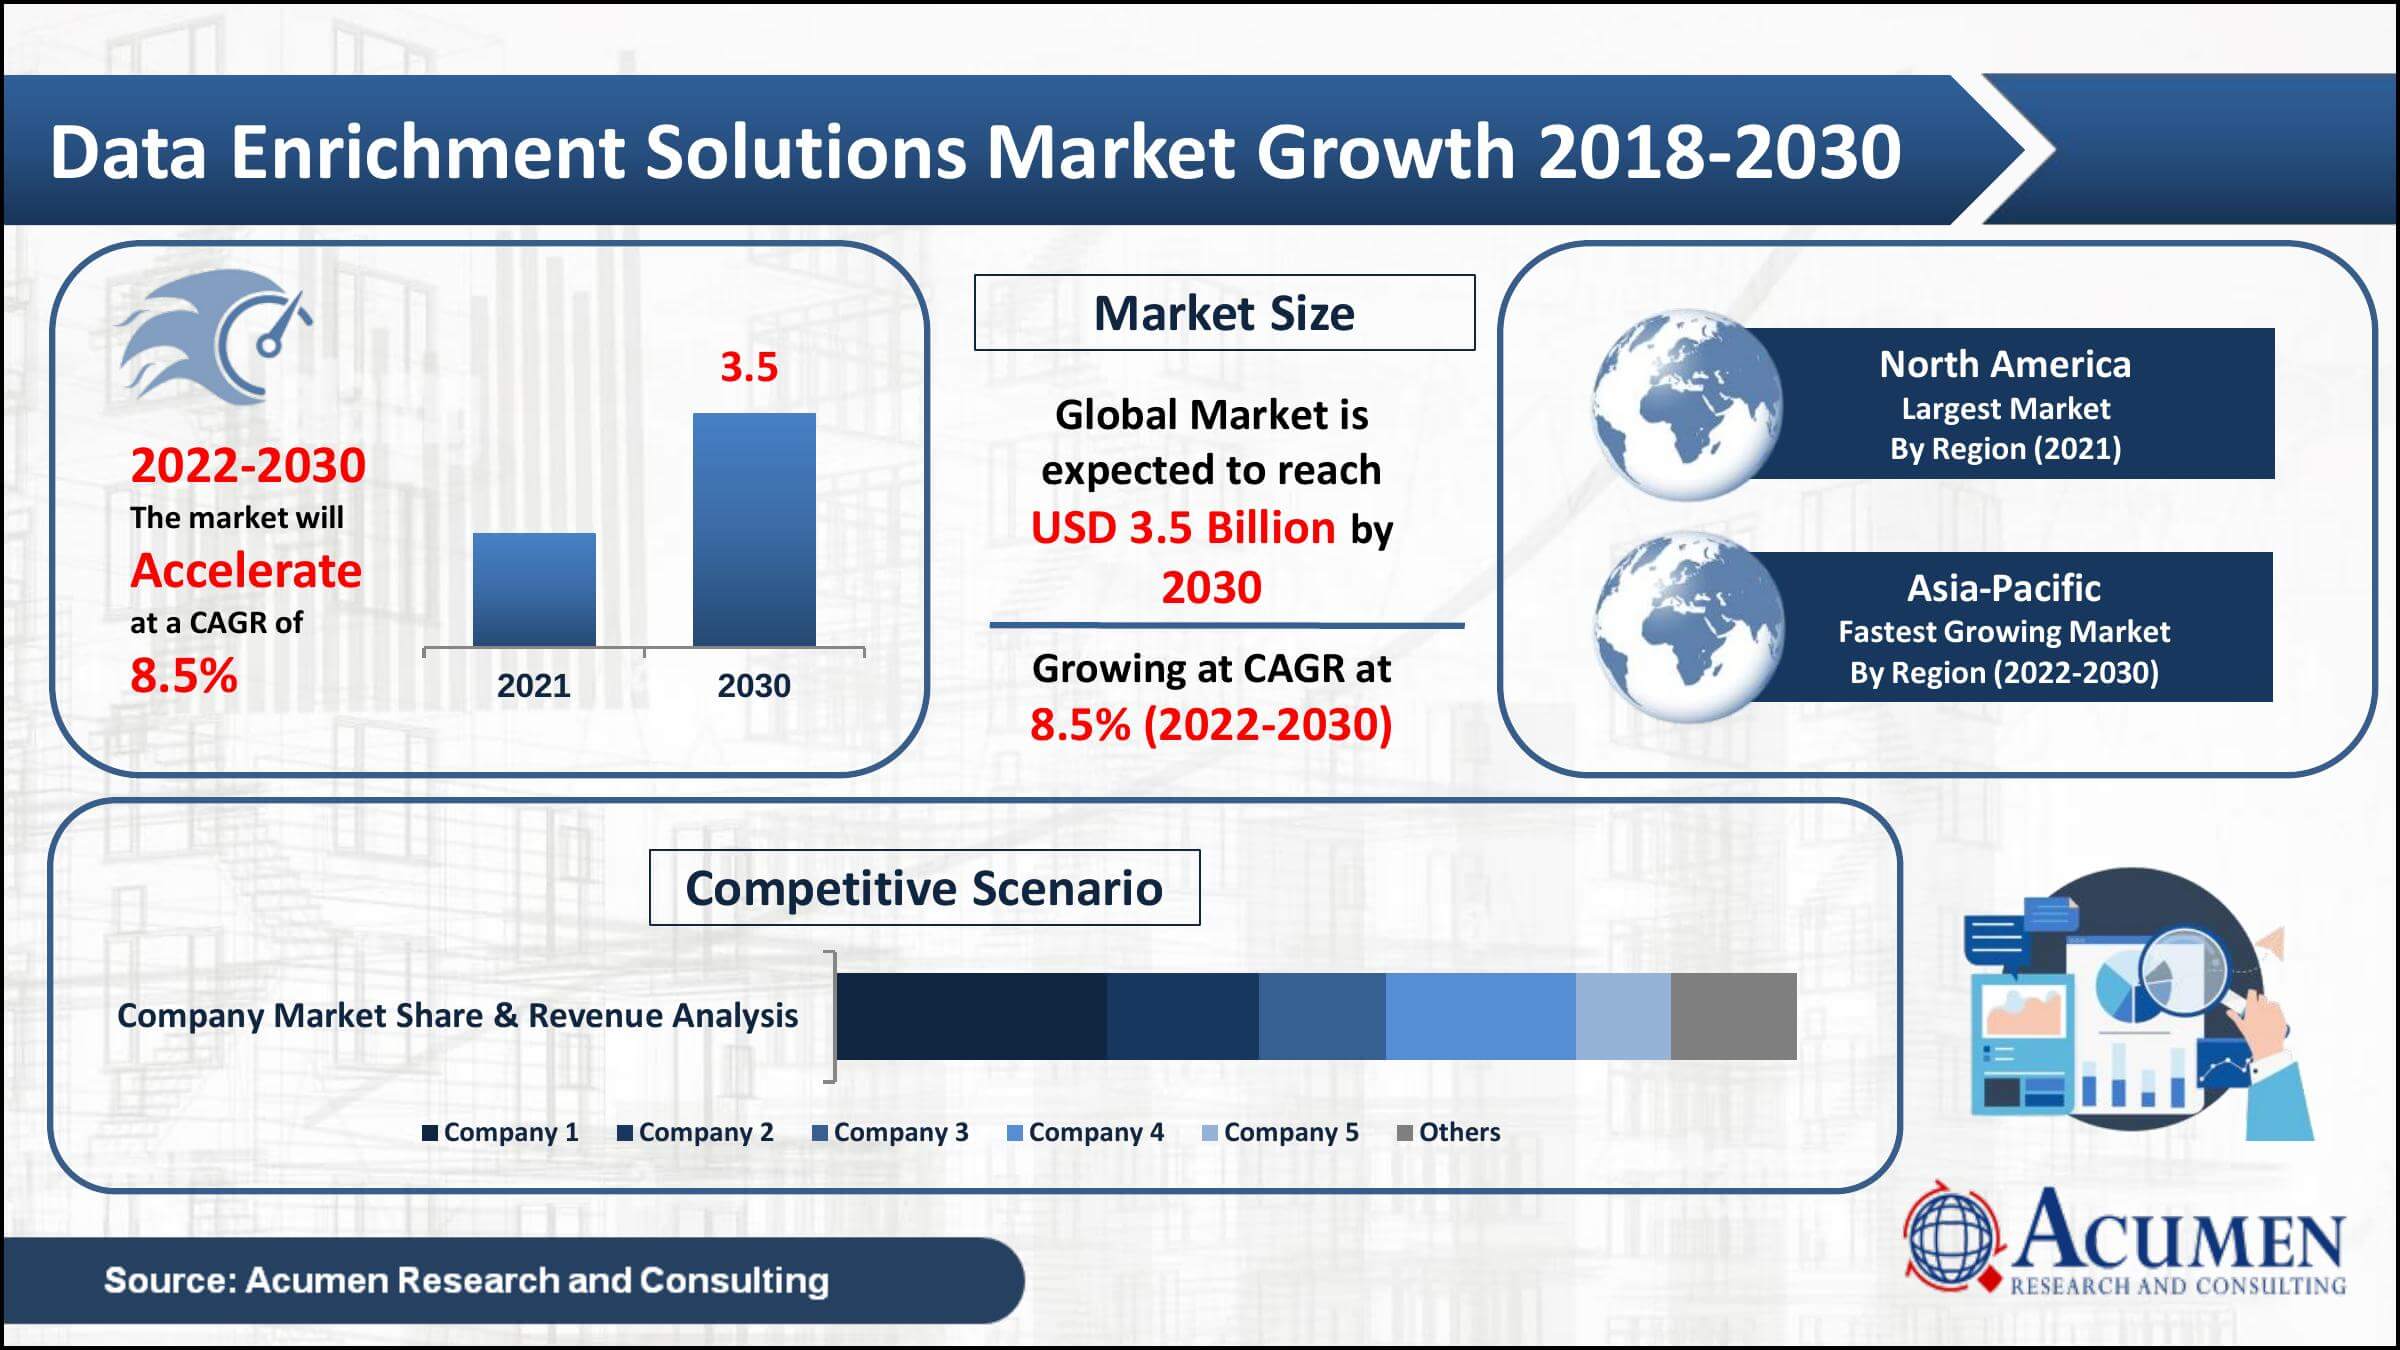 Data Enrichment Solutions Market value to reach USD 3.5 Billion by 2030 at 8.5% CAGR